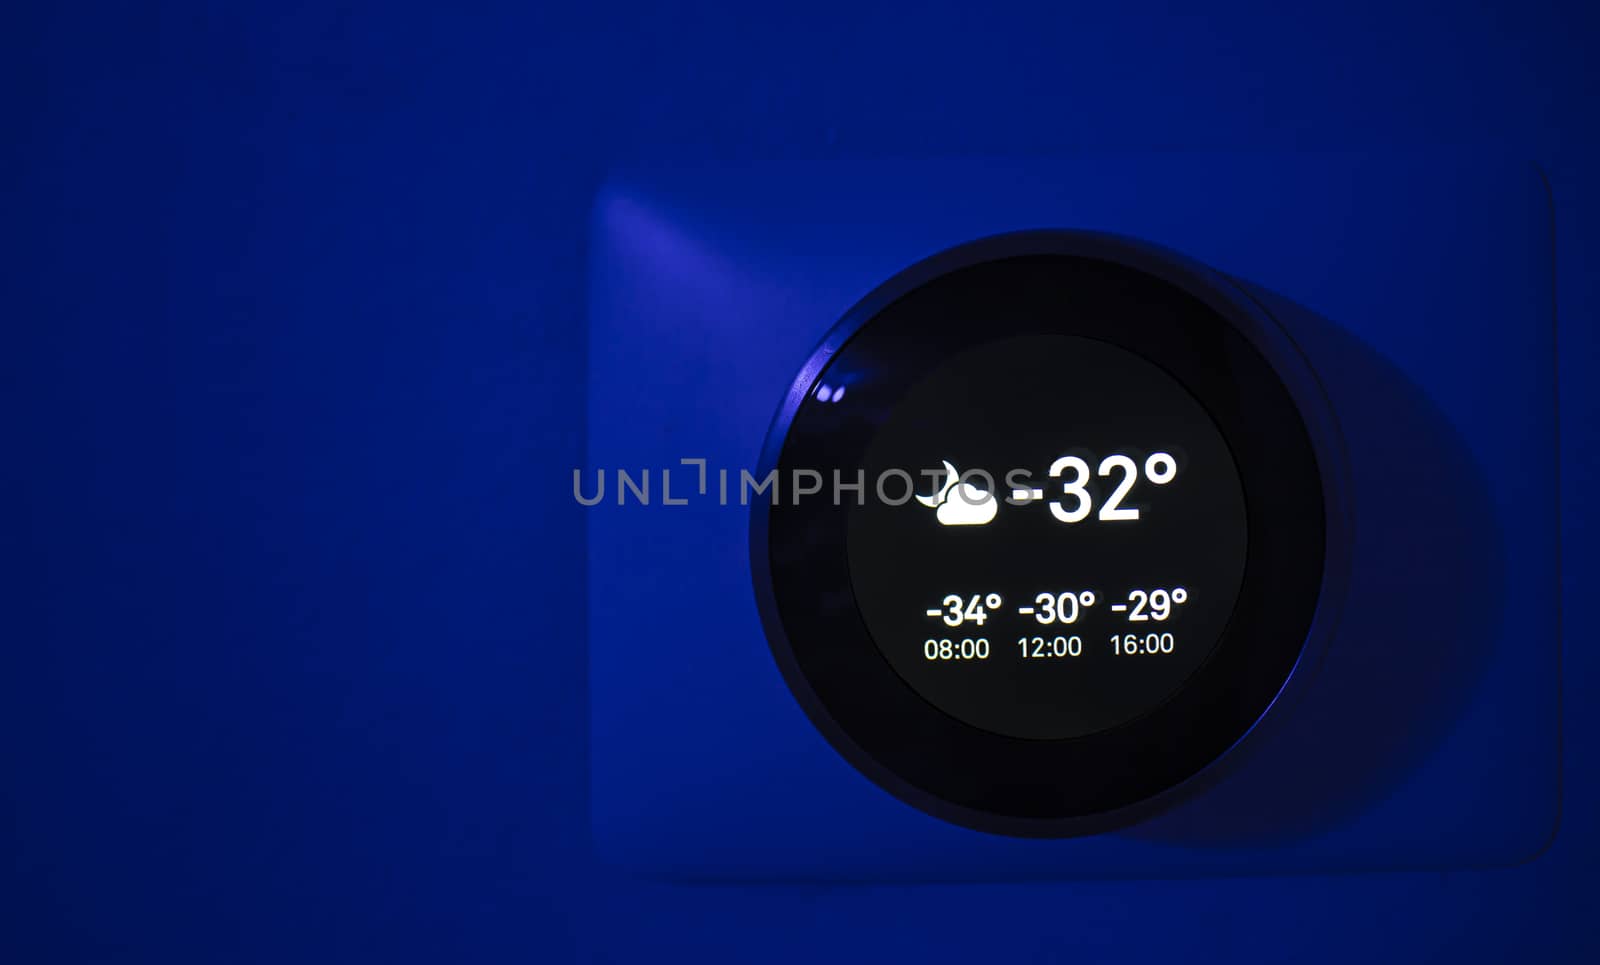 Digital Thermostat at night showing the outside temperature of -31 degrees celsius during the winter by oasisamuel